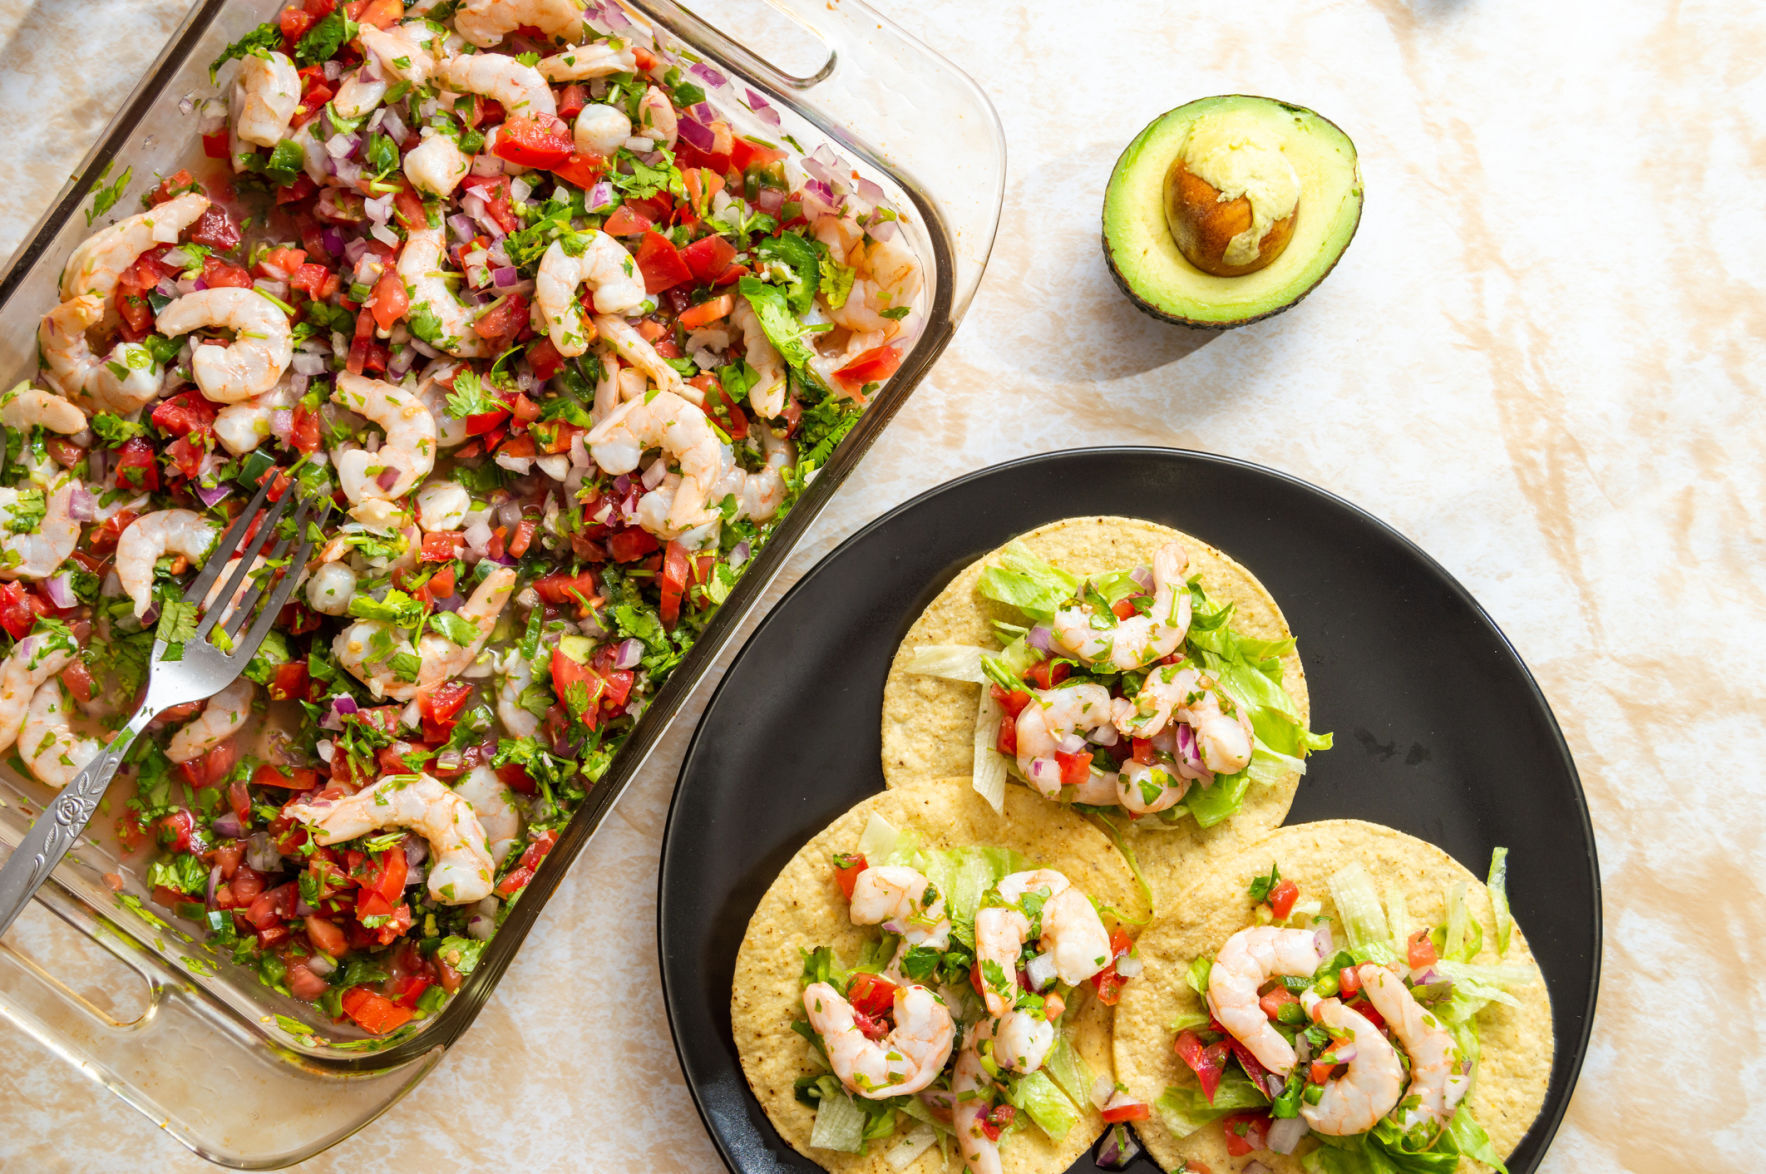 Shrimp and avocado ceviche makes a fine meal on a hot